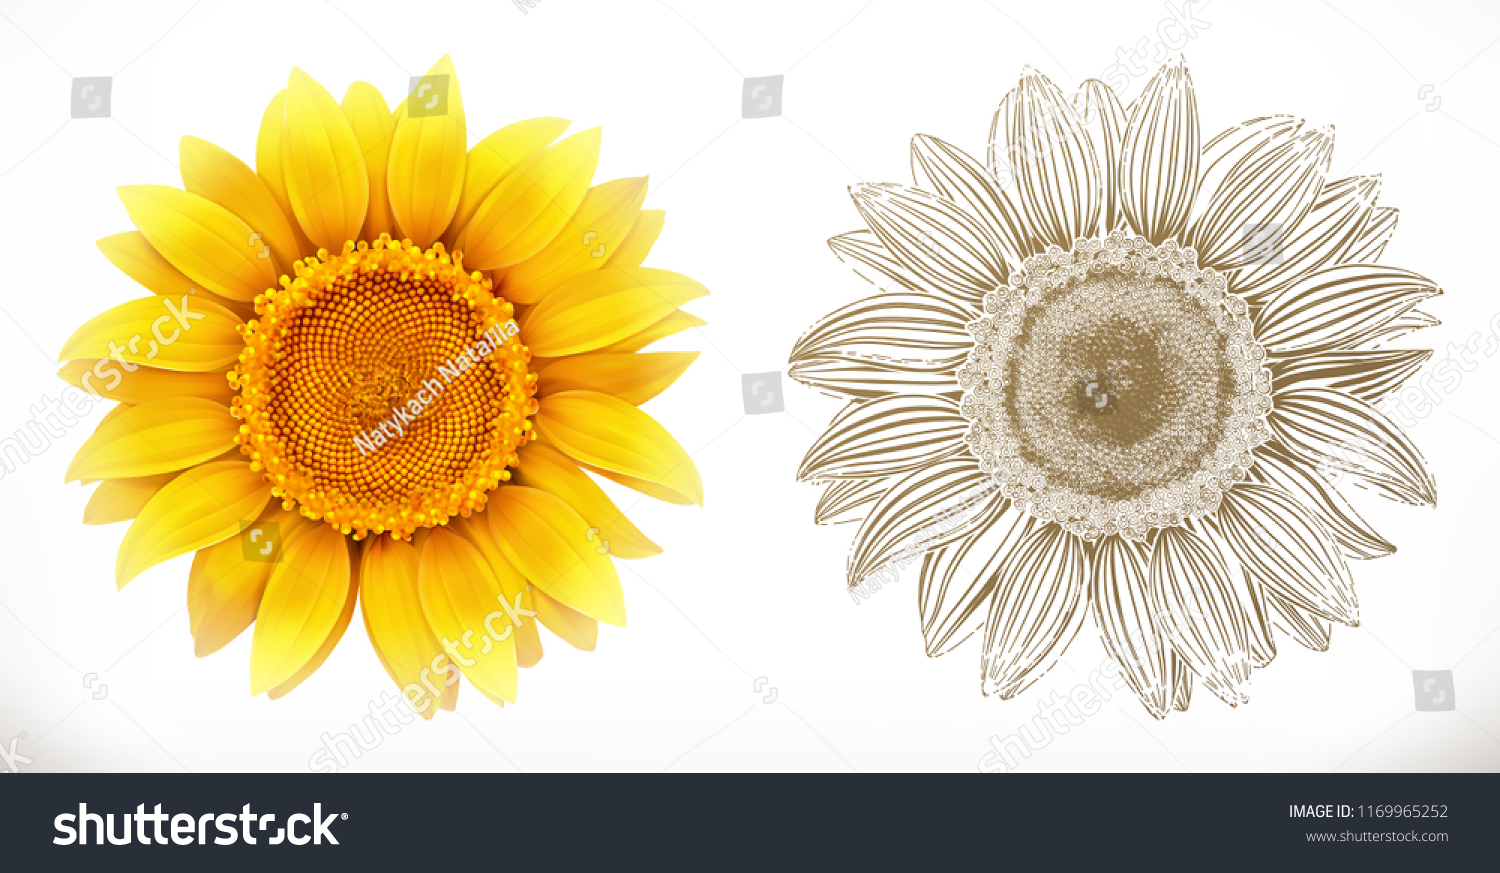 SVG of Sunflower. 3d realism and engraving styles. Vector illustration svg